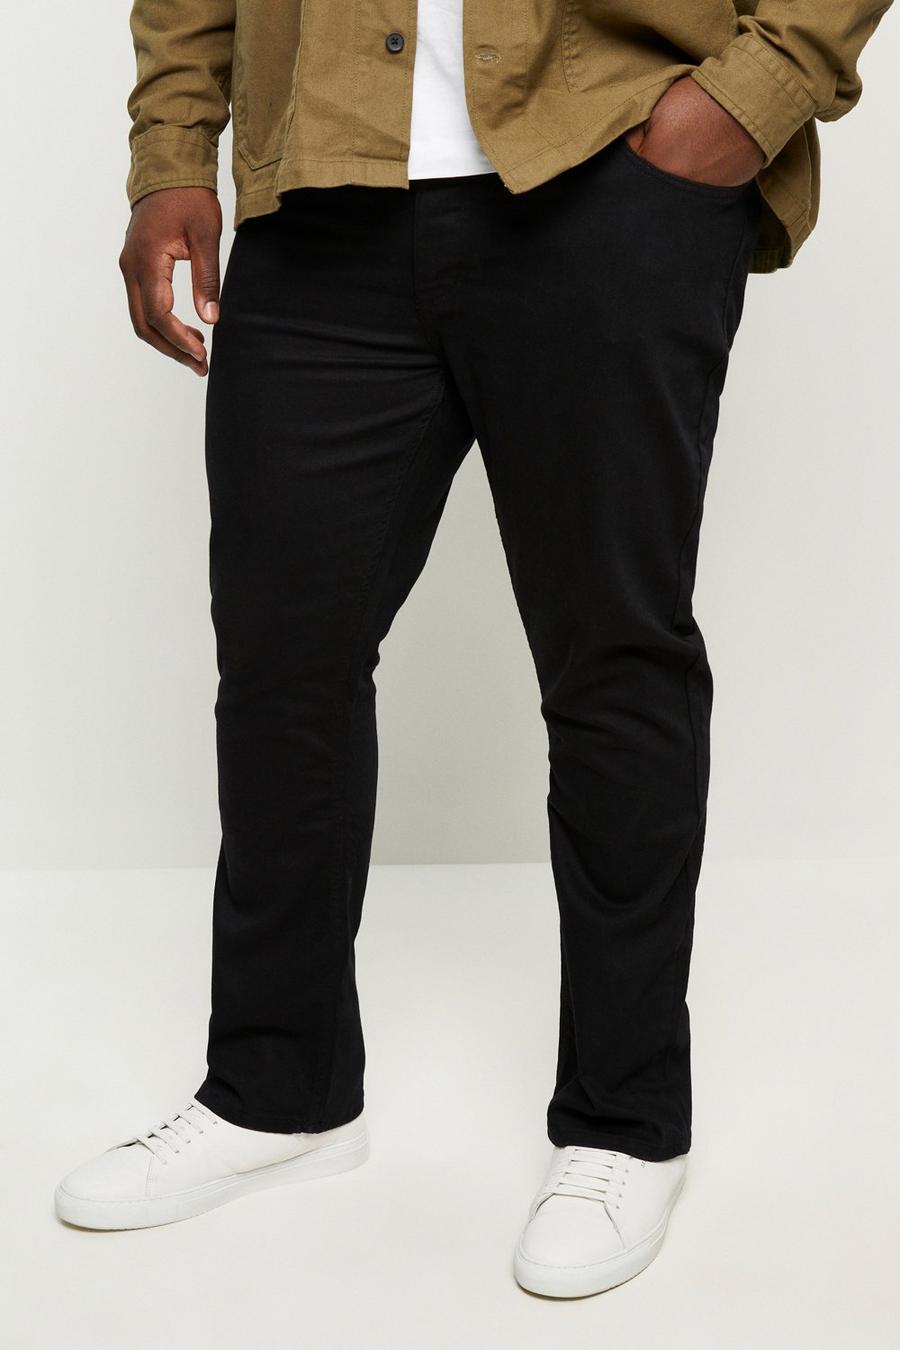 Plus And Tall Bootcut Black Organic Jeans